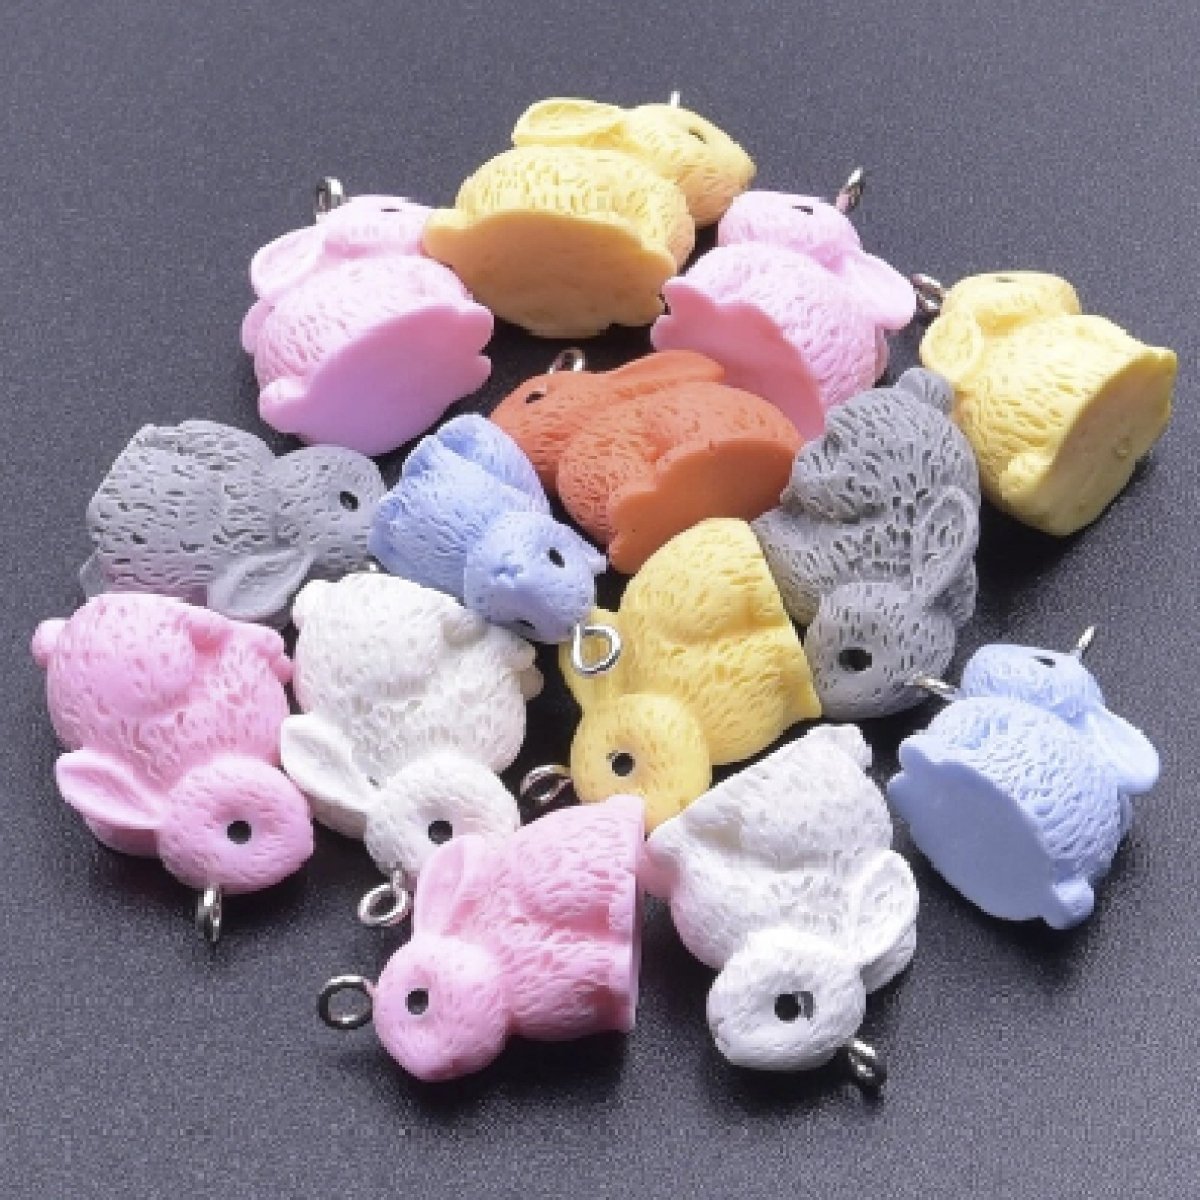 10pcs Miniature Mini Garden Animal Figurines Charms with Loop Pendant Craft - Rabbits - Asia Sell